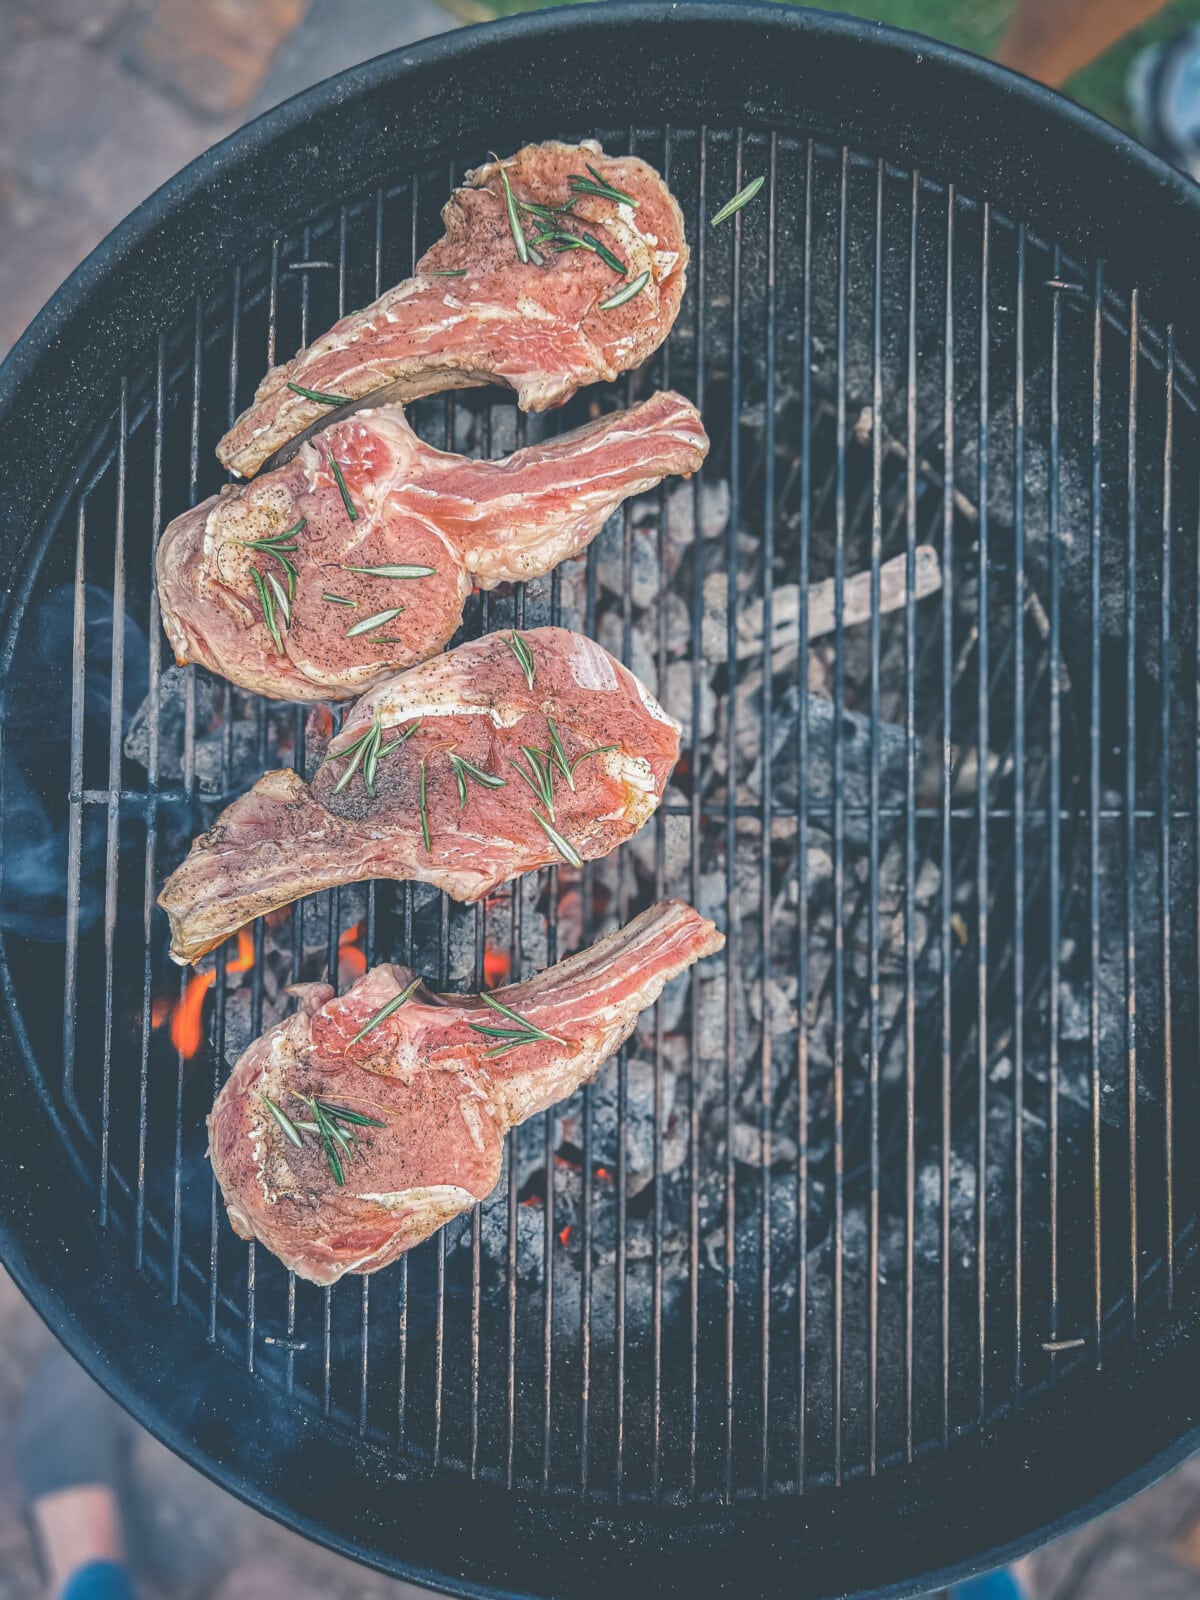 Veal chops over direct heat on a grill.